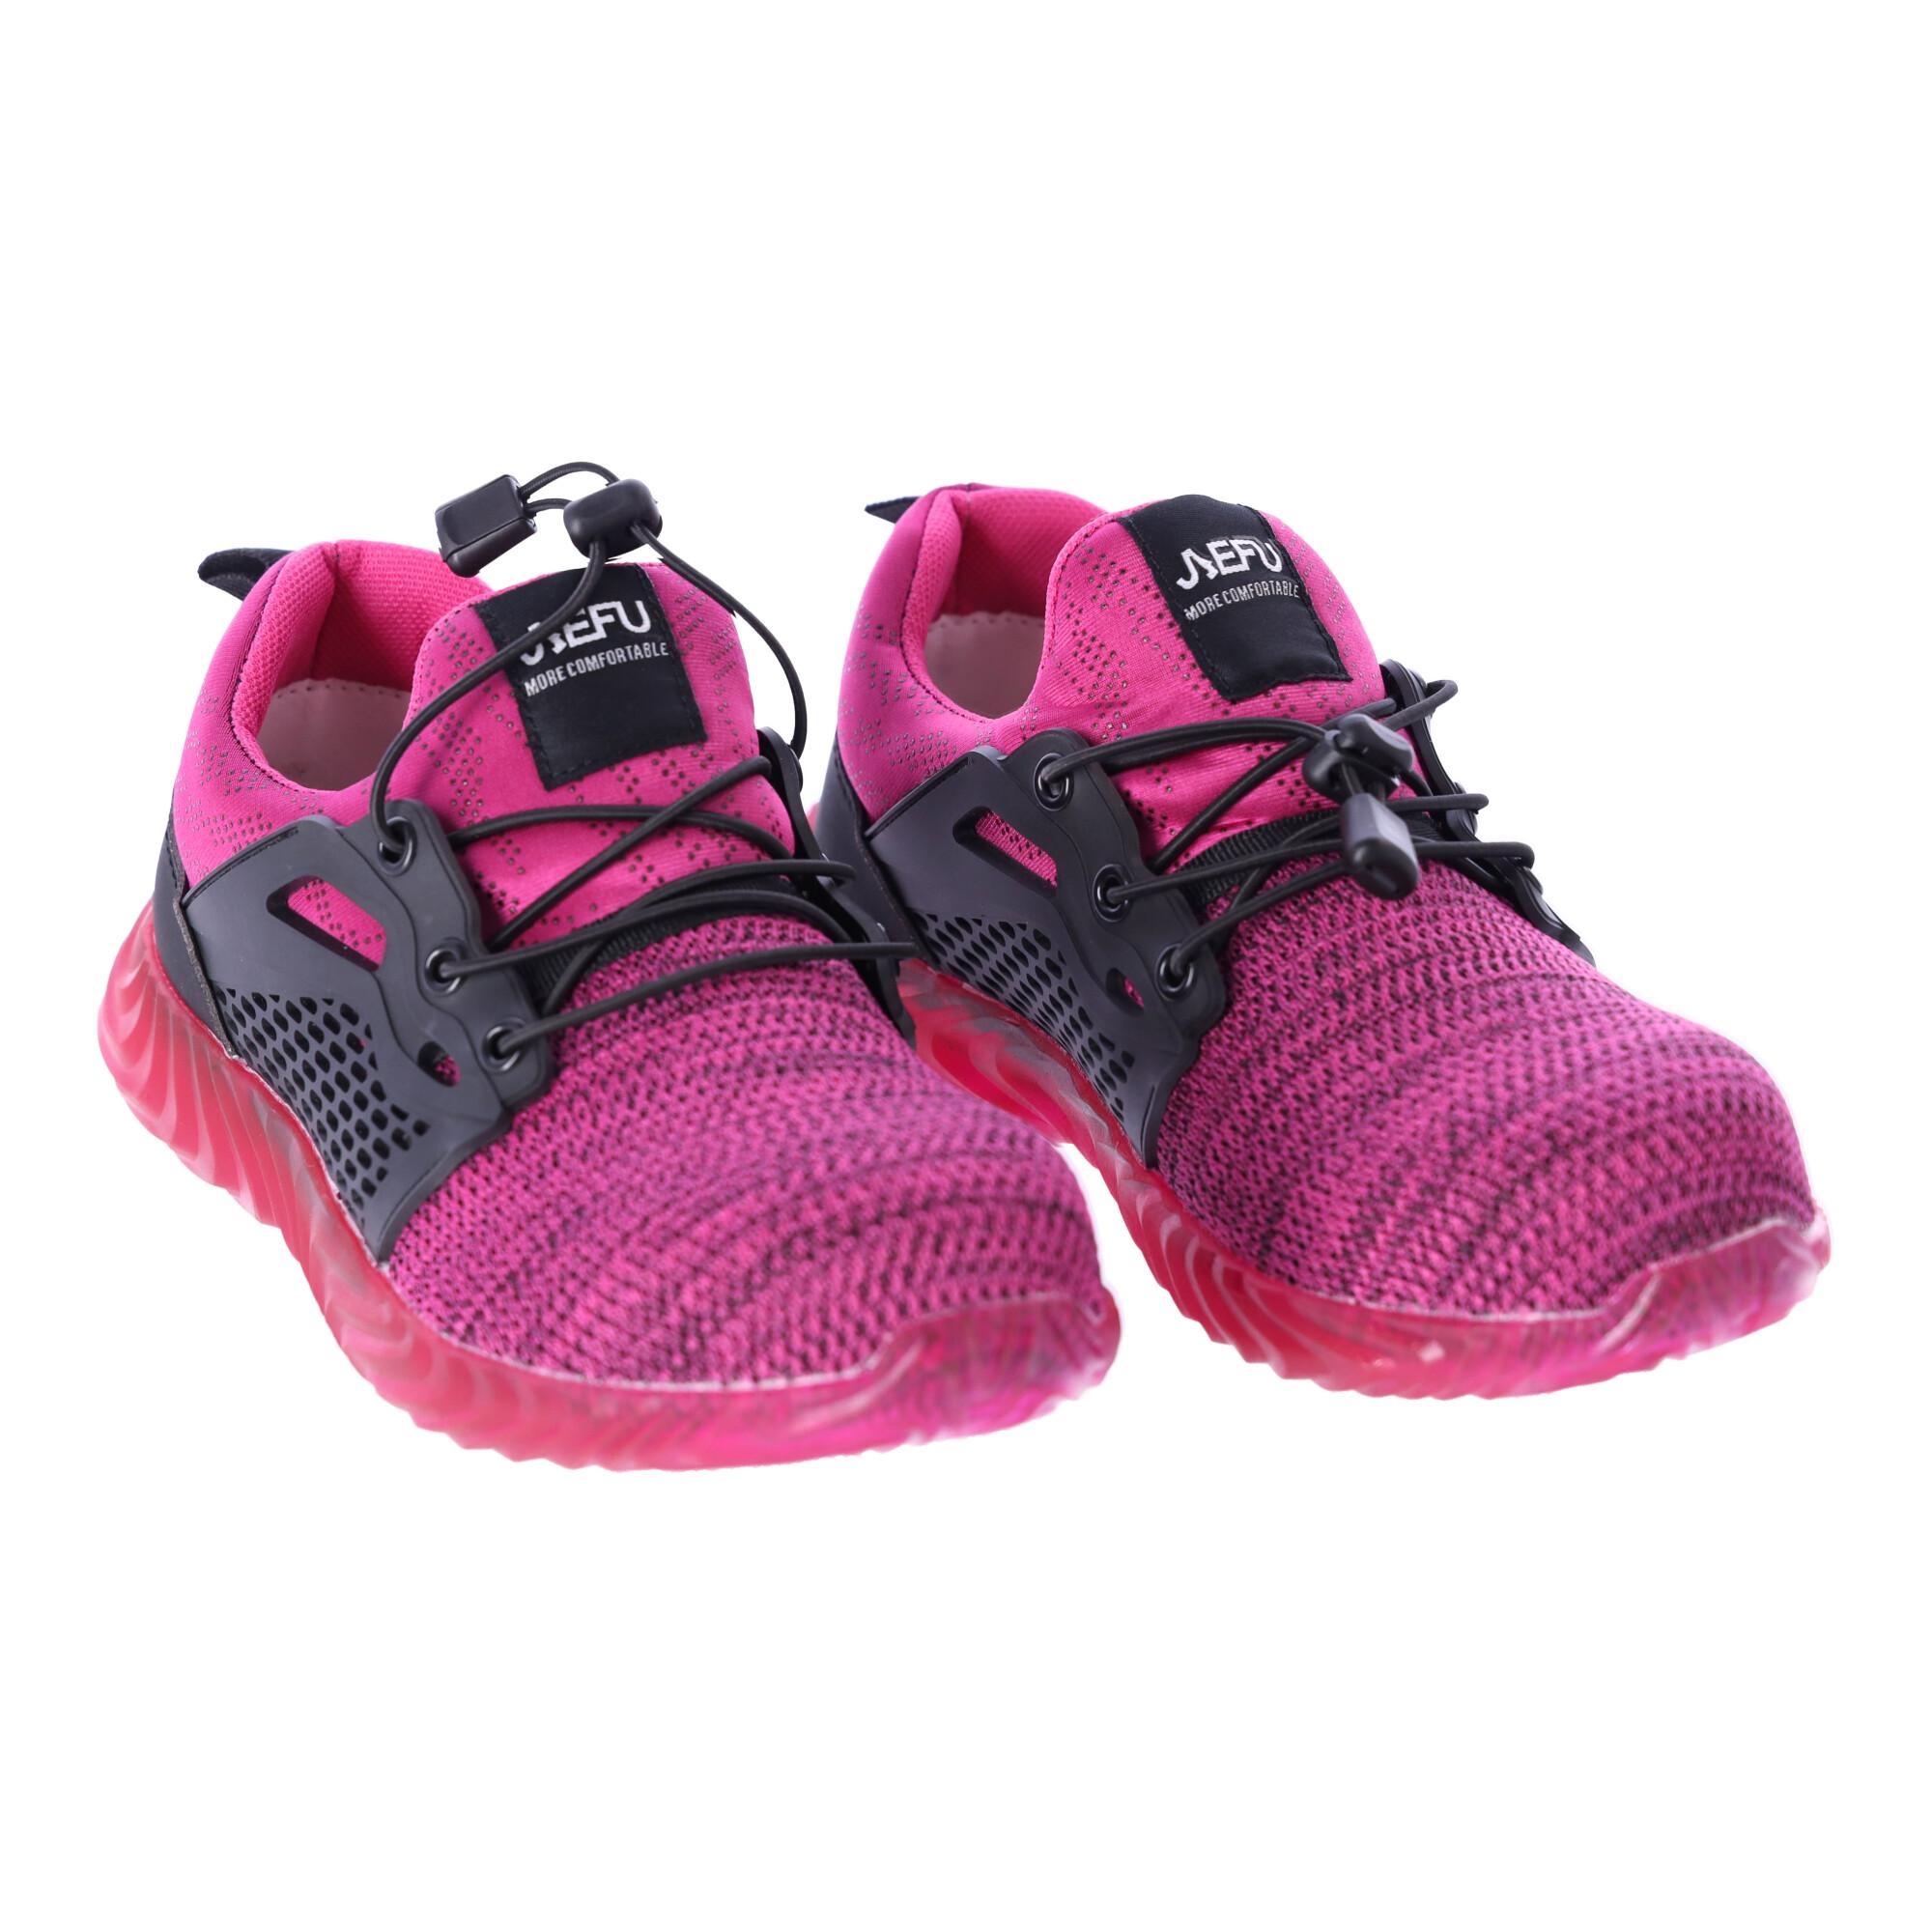 Work safety shoes "38" - pink